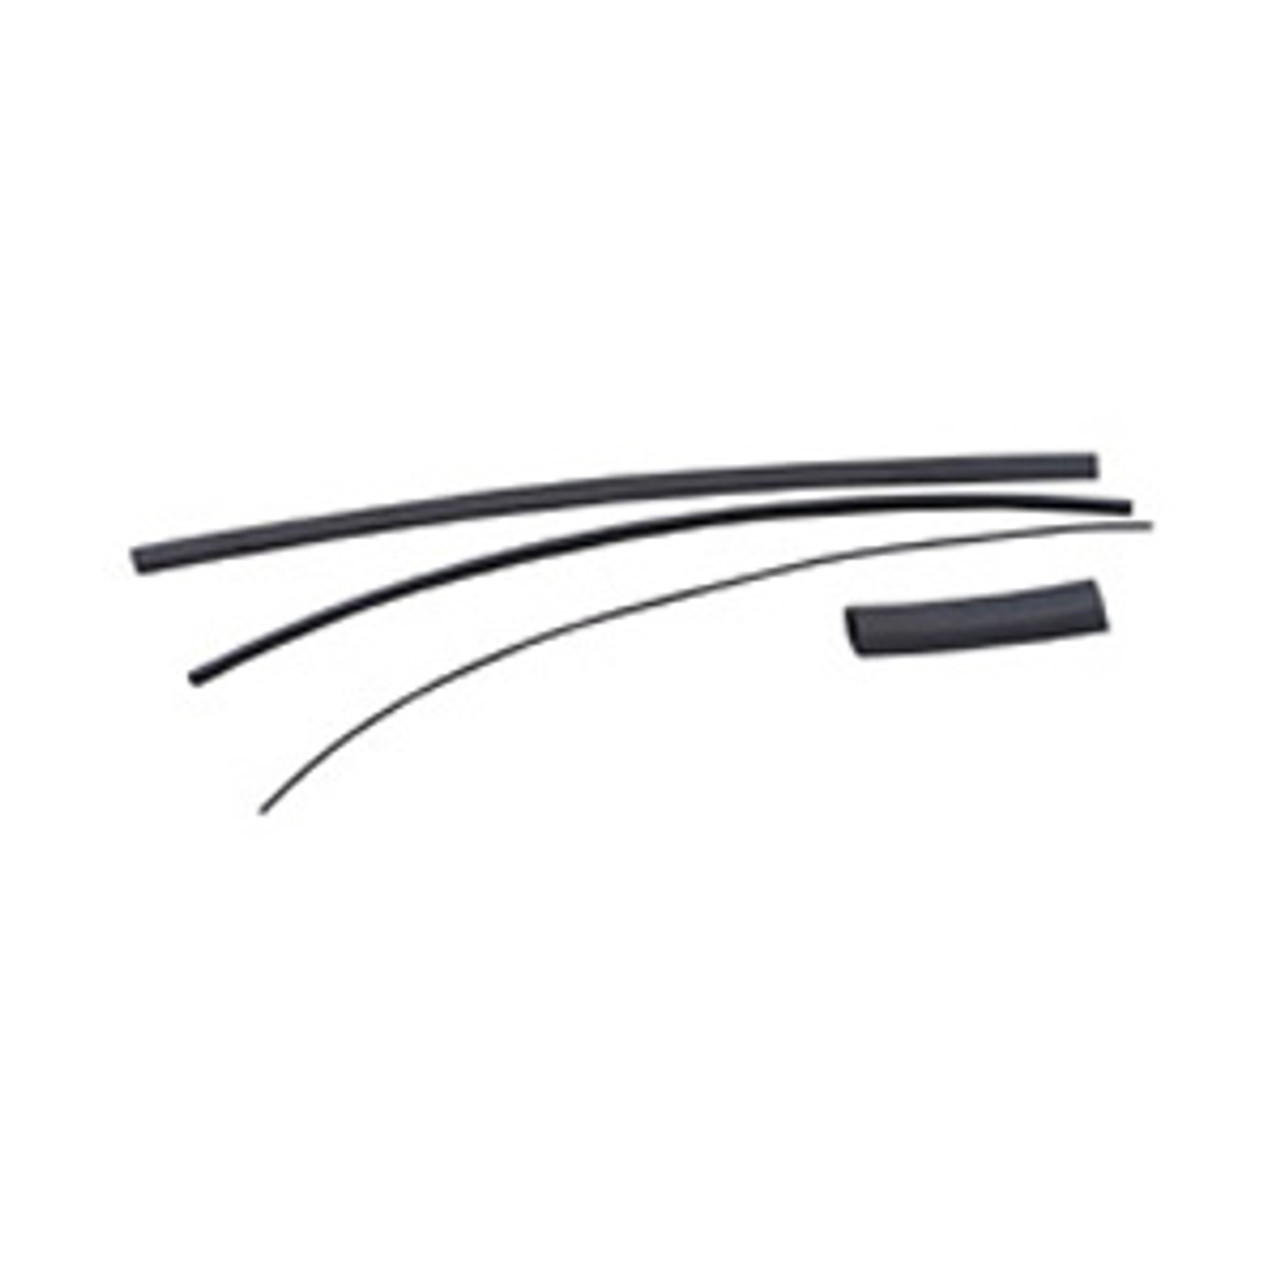 Ideal 46-322 - 1/2" OD Thermo-Shrink Thin-Wall Heat Shrink